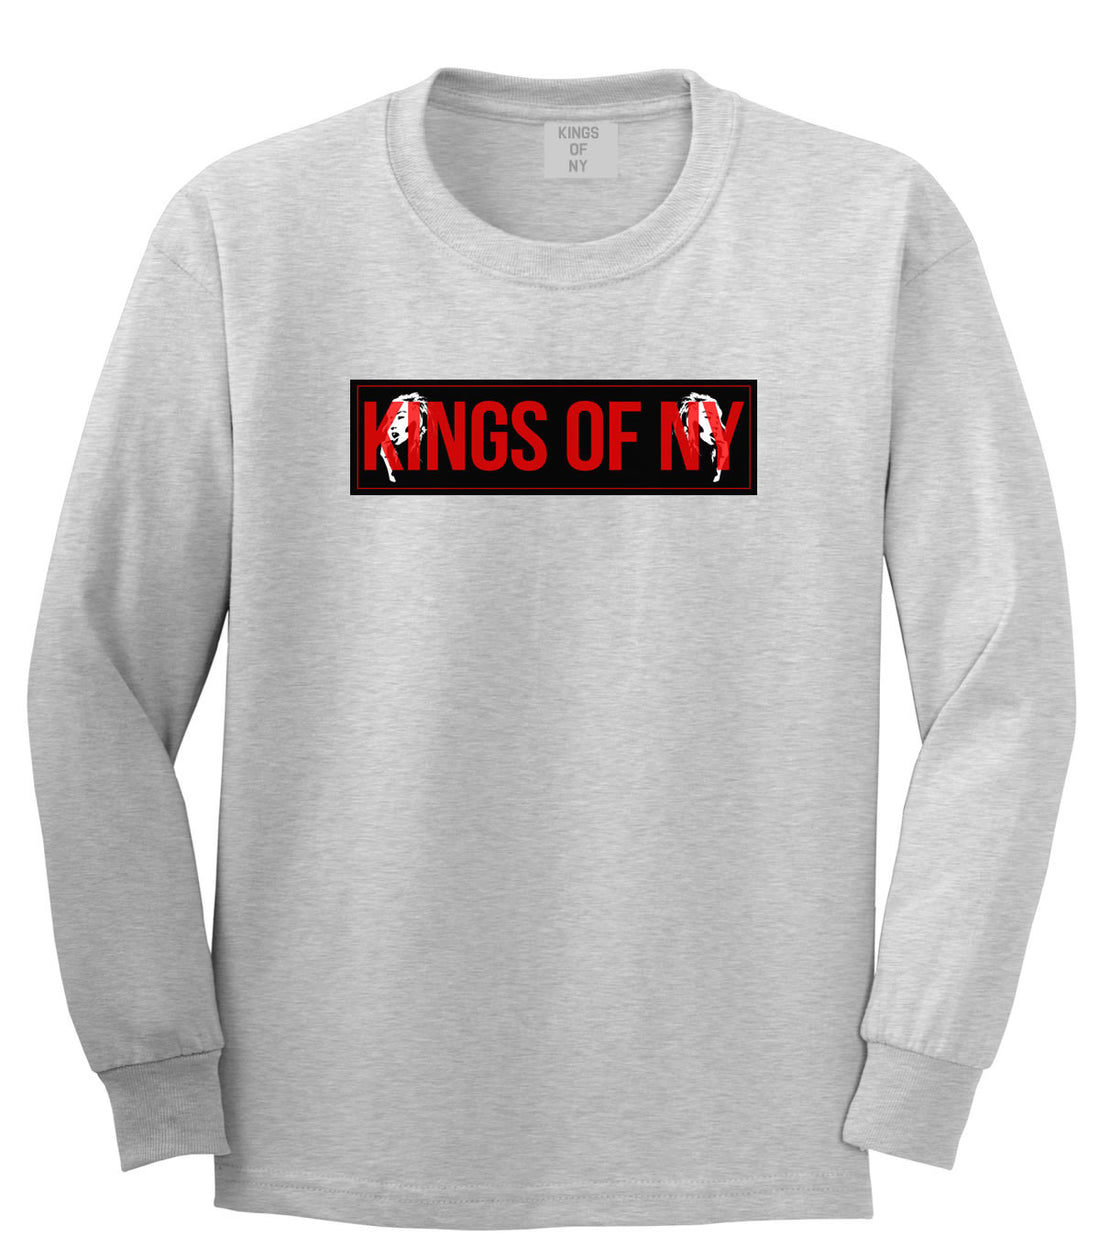 Red Girl Logo Print Boys Kids Long Sleeve T-Shirt in Grey by Kings Of NY